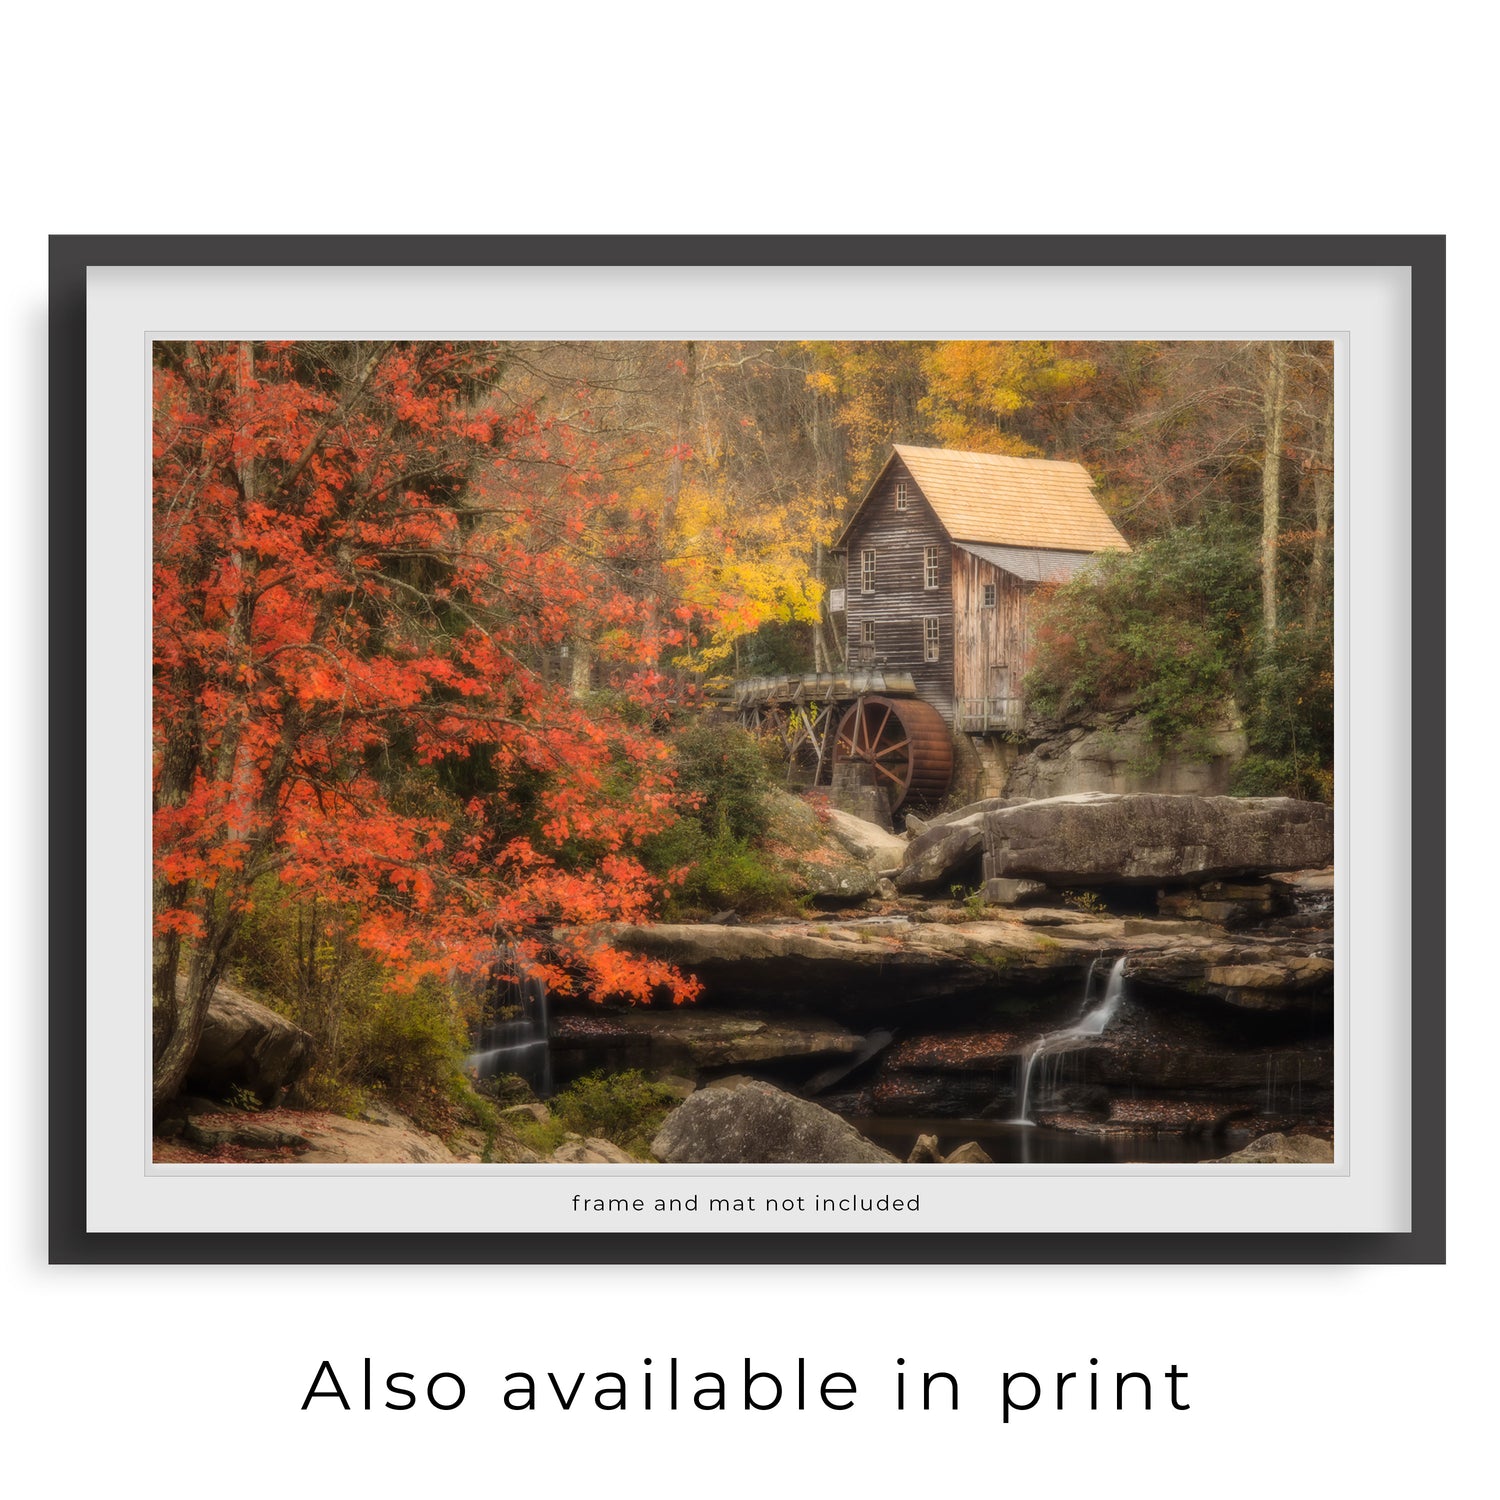 The photograph is beautifully presented as a framed print, showing this fall photograph is also available as a paper print. Please note that the frame and mat shown are for display purposes only and are not included in the purchase.